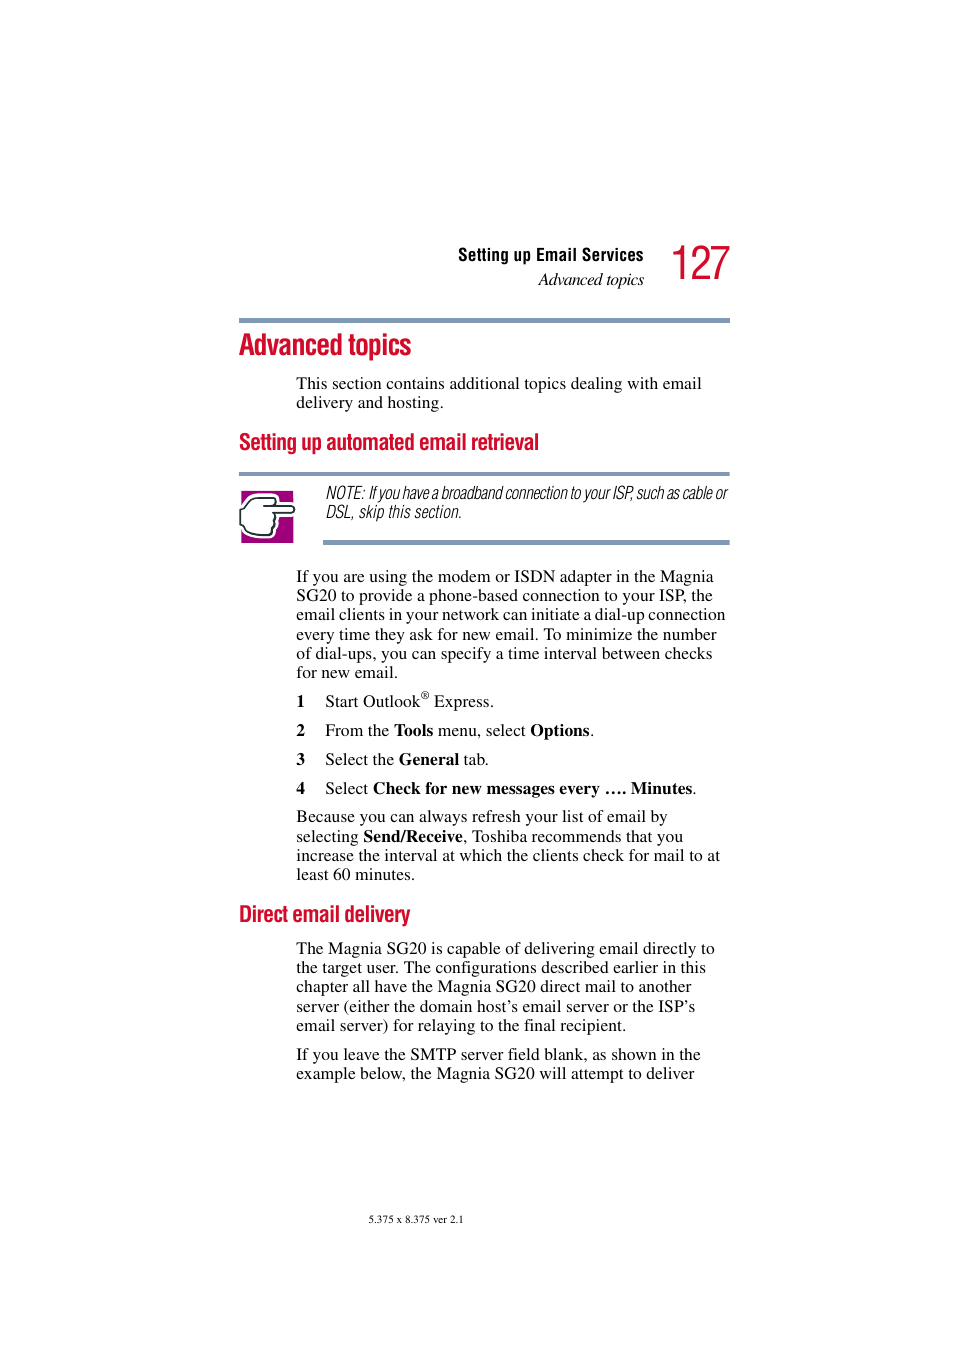 Advanced topics, Setting up automated email retrieval, Direct email delivery | Toshiba Tekbright 700P User Manual | Page 125 / 305